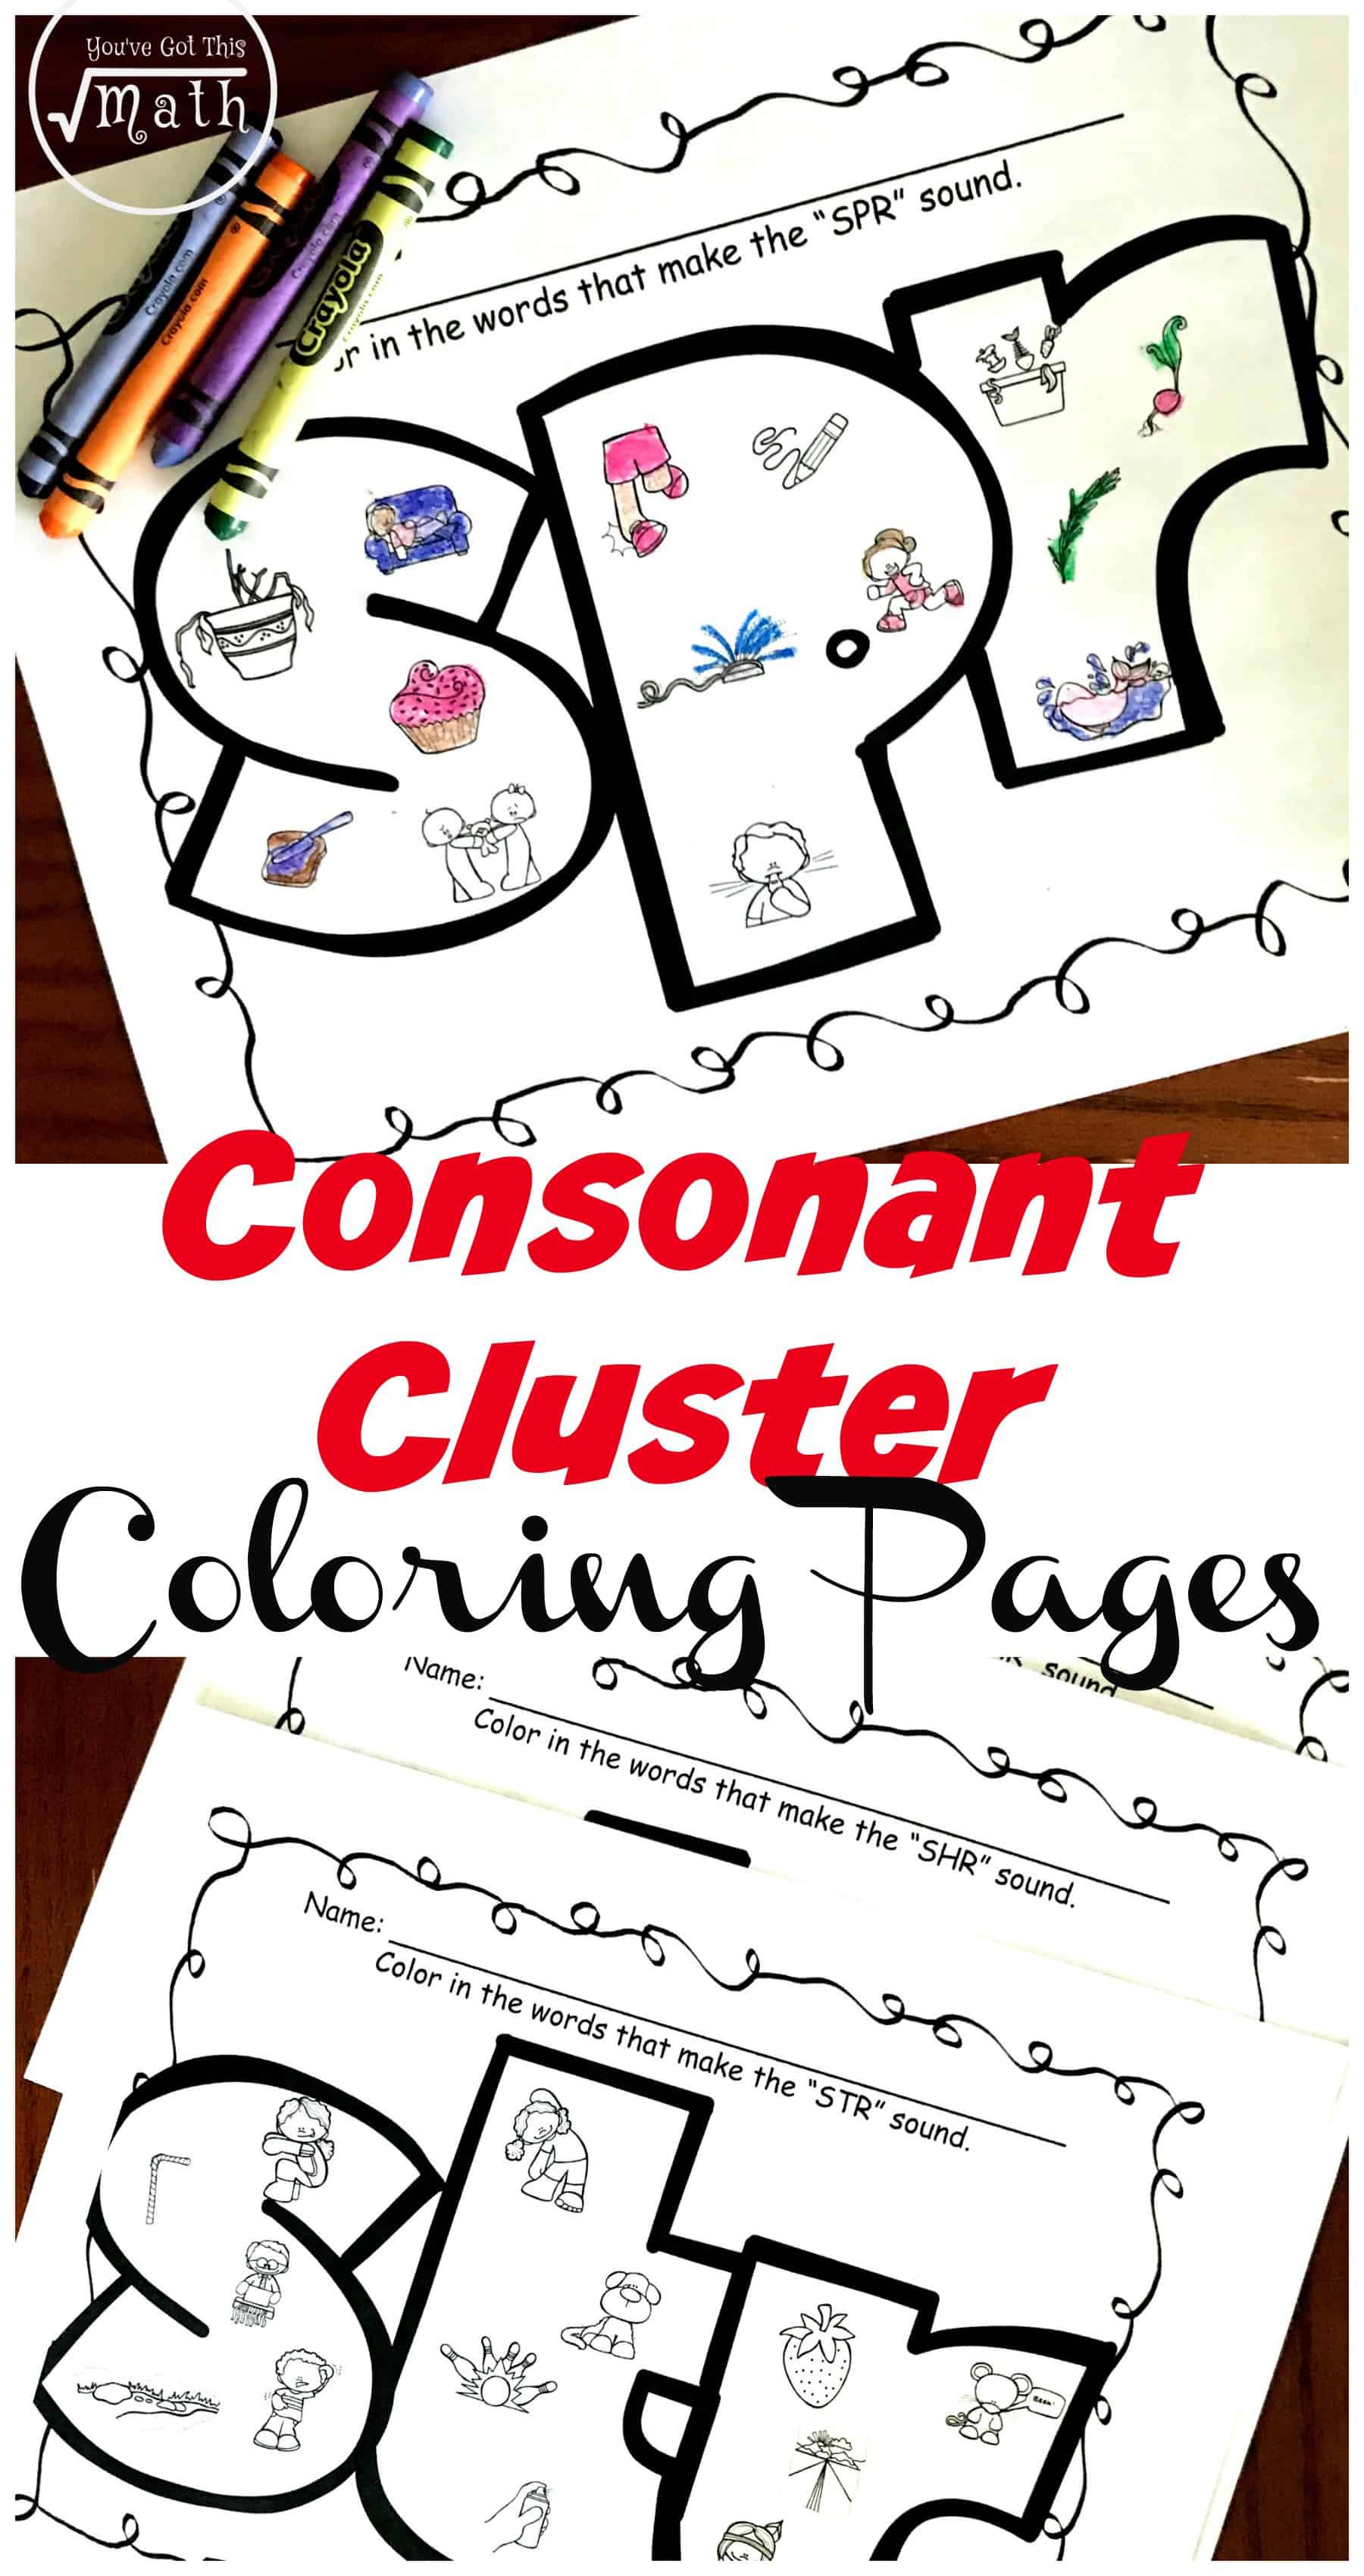 Grab these free consonant cluster worksheets to work on trigraphs and the sounds they make. Your children will enjoy coloring in the fun pictures and they practice saying the sounds that consonant clusters like spr, squ, and shr make.